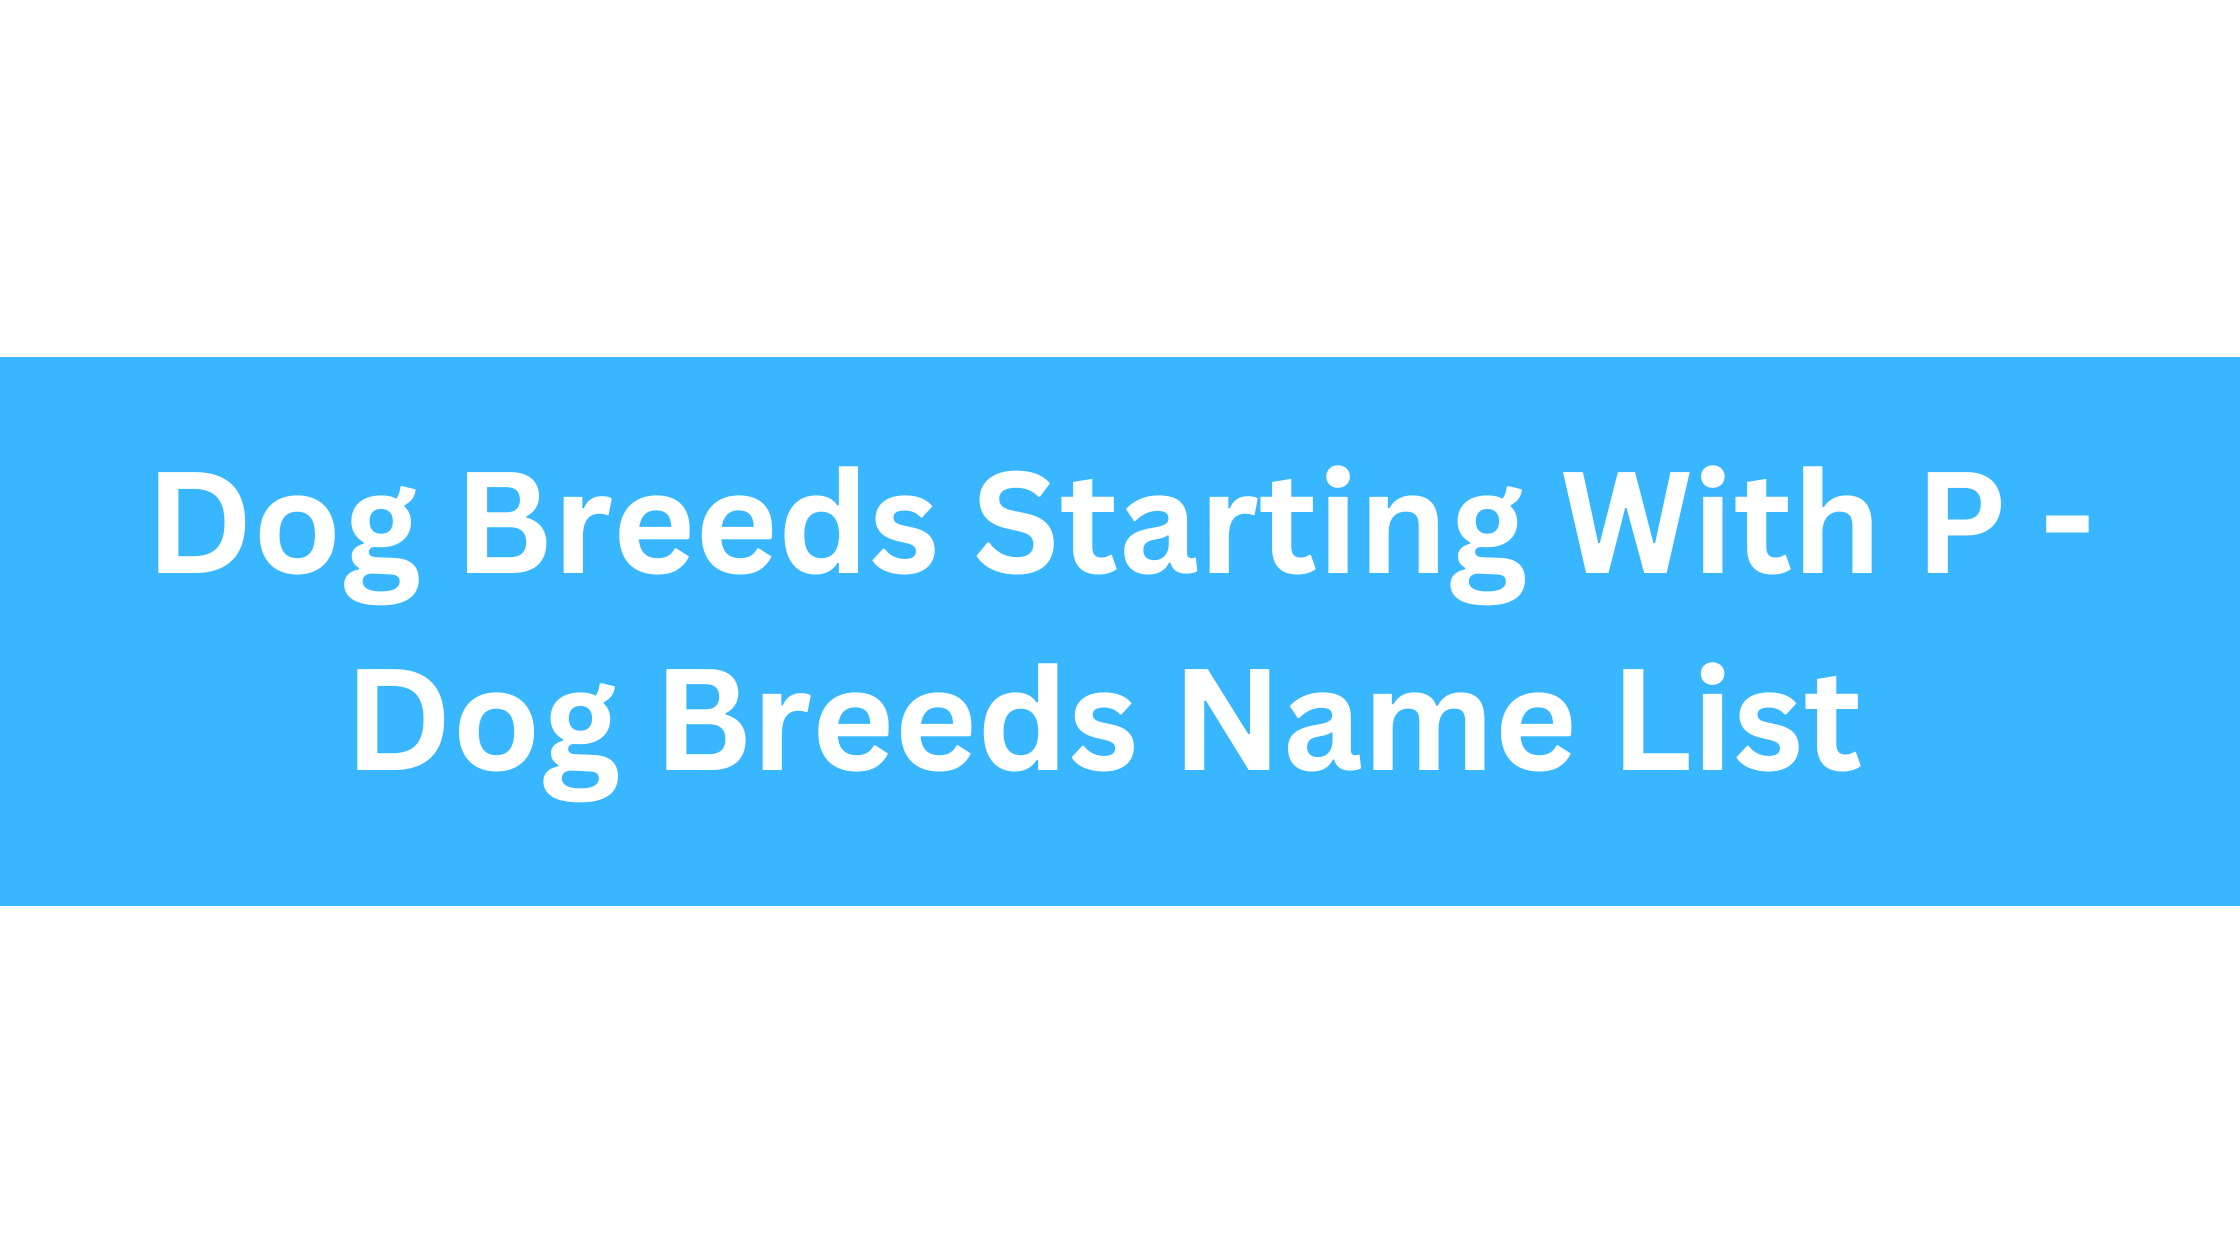 Dog Breeds Starting With P